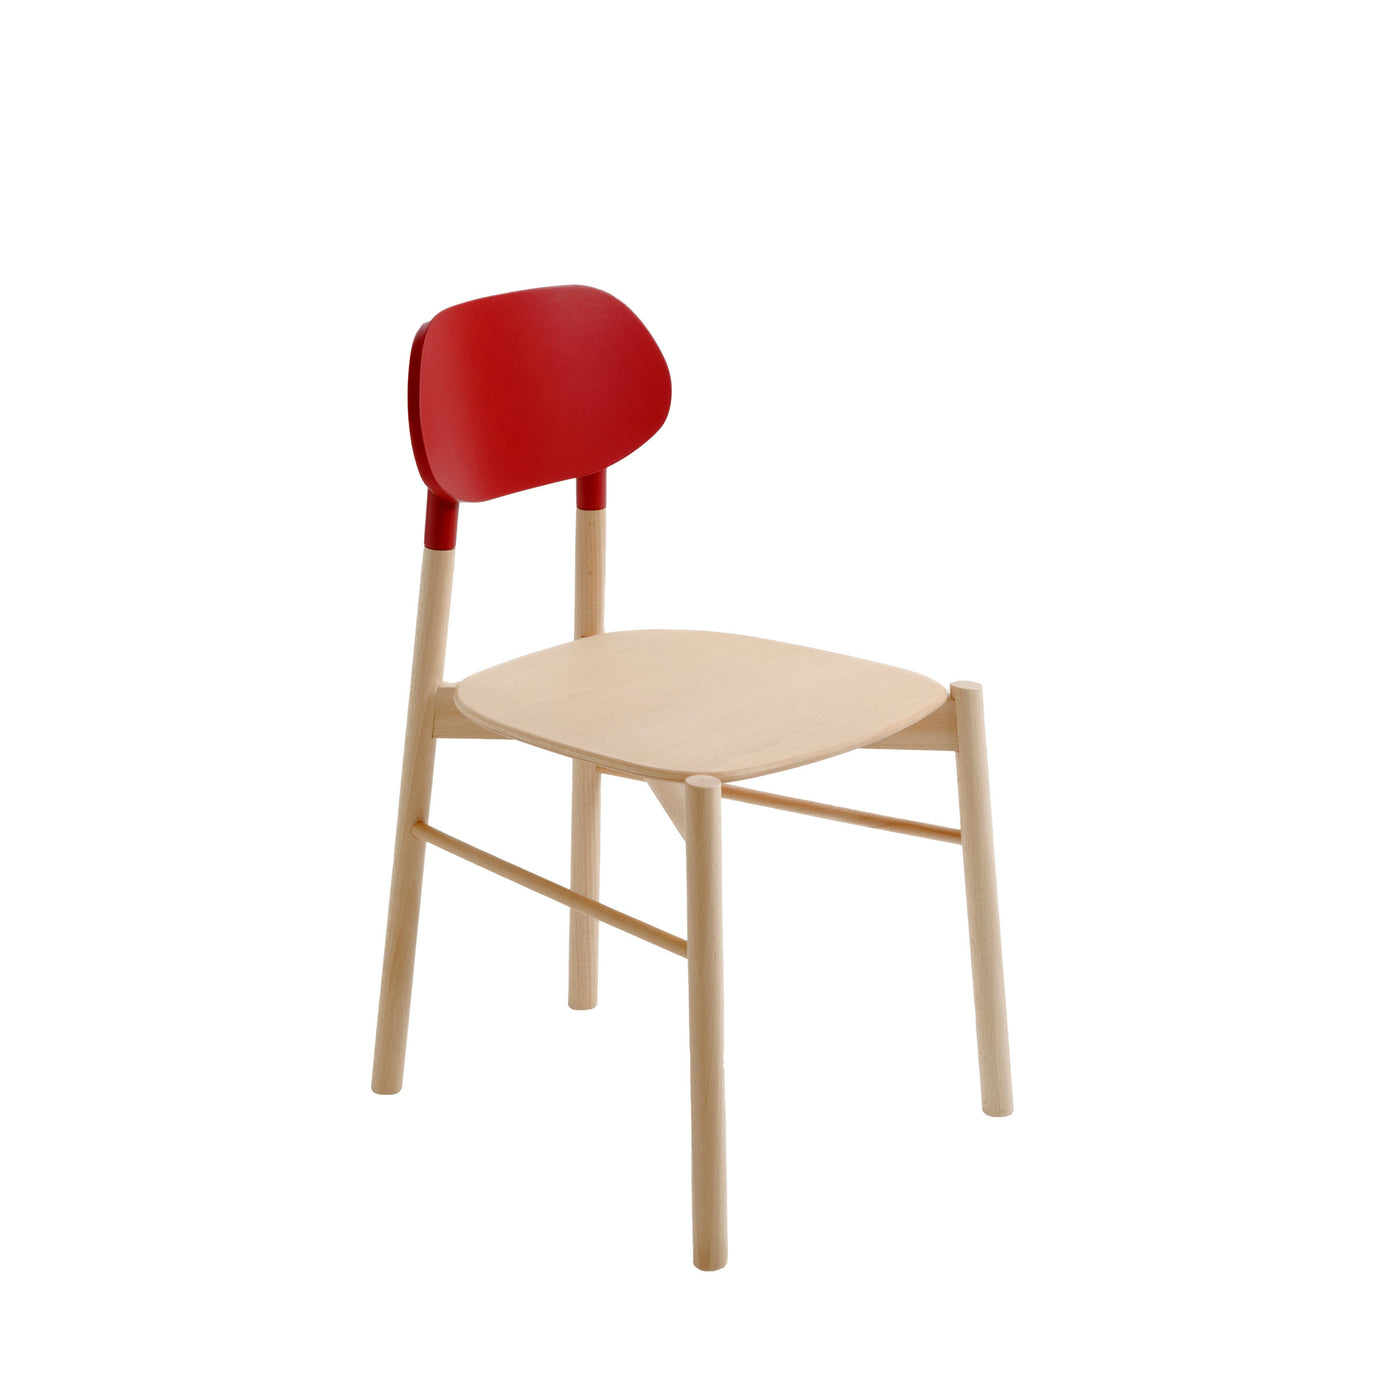 Wood Dining Chair BOKKEN by Bellavista + Piccini for Colé Italia 05